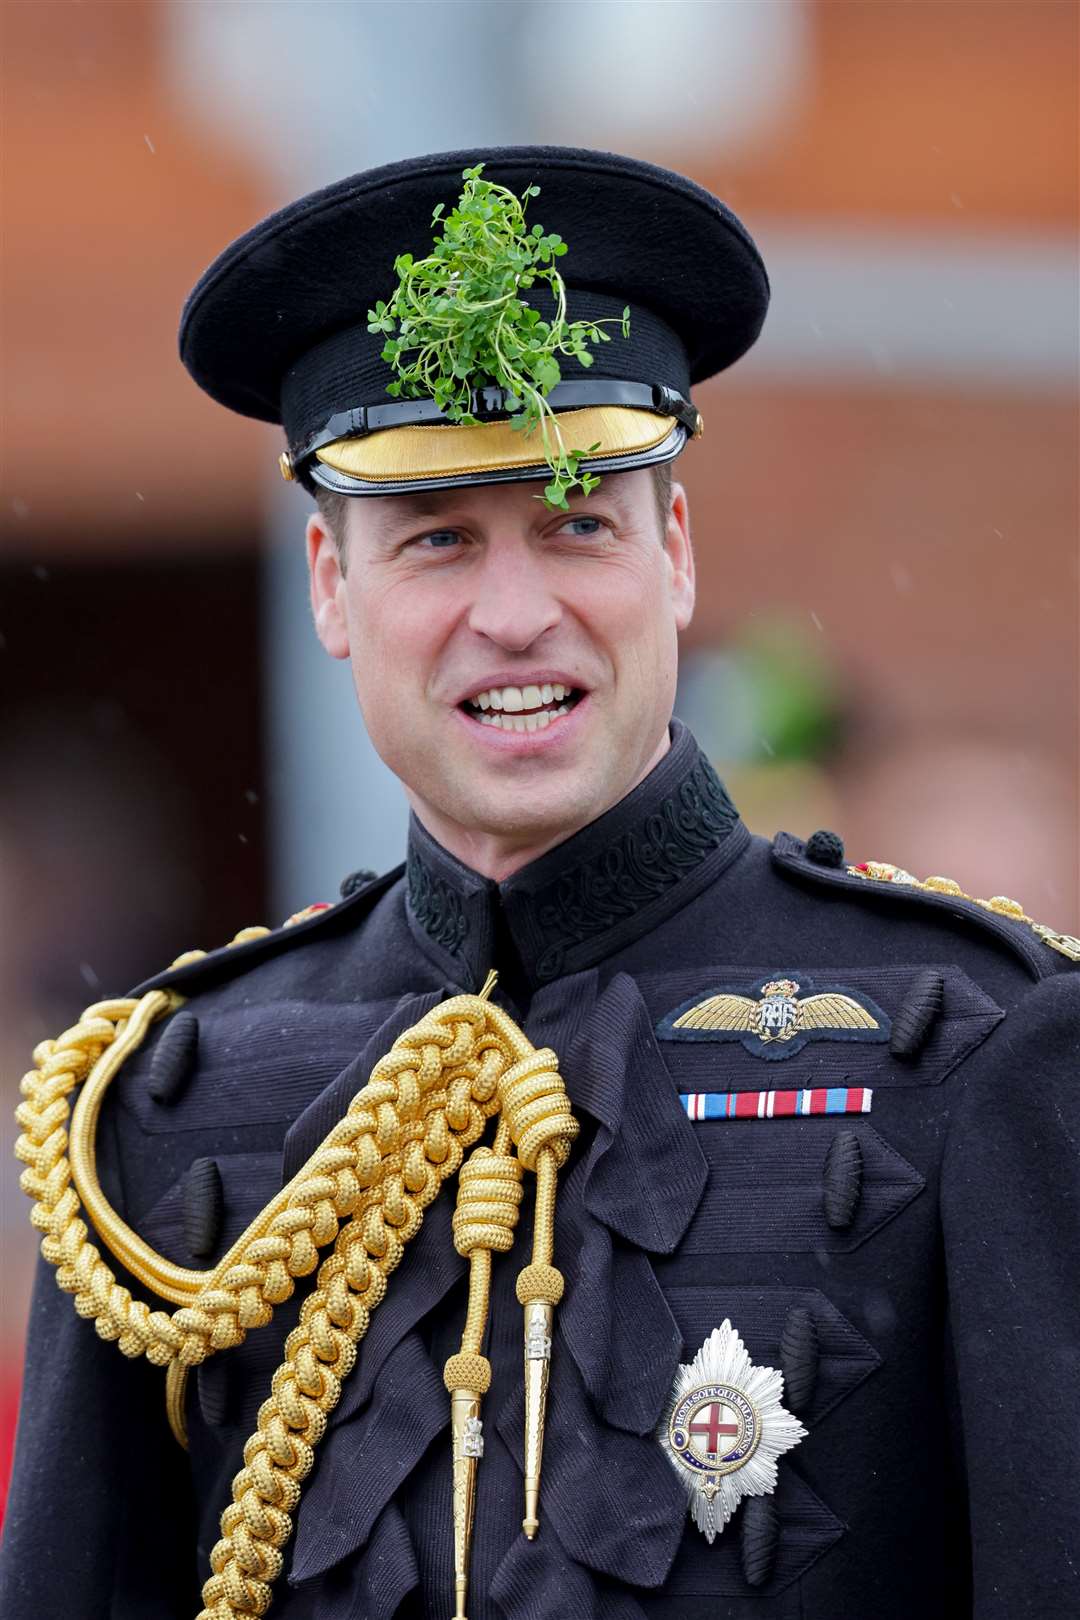 The Prince of Wales with traditional shamrock in his cap (Chris Jackson/PA)